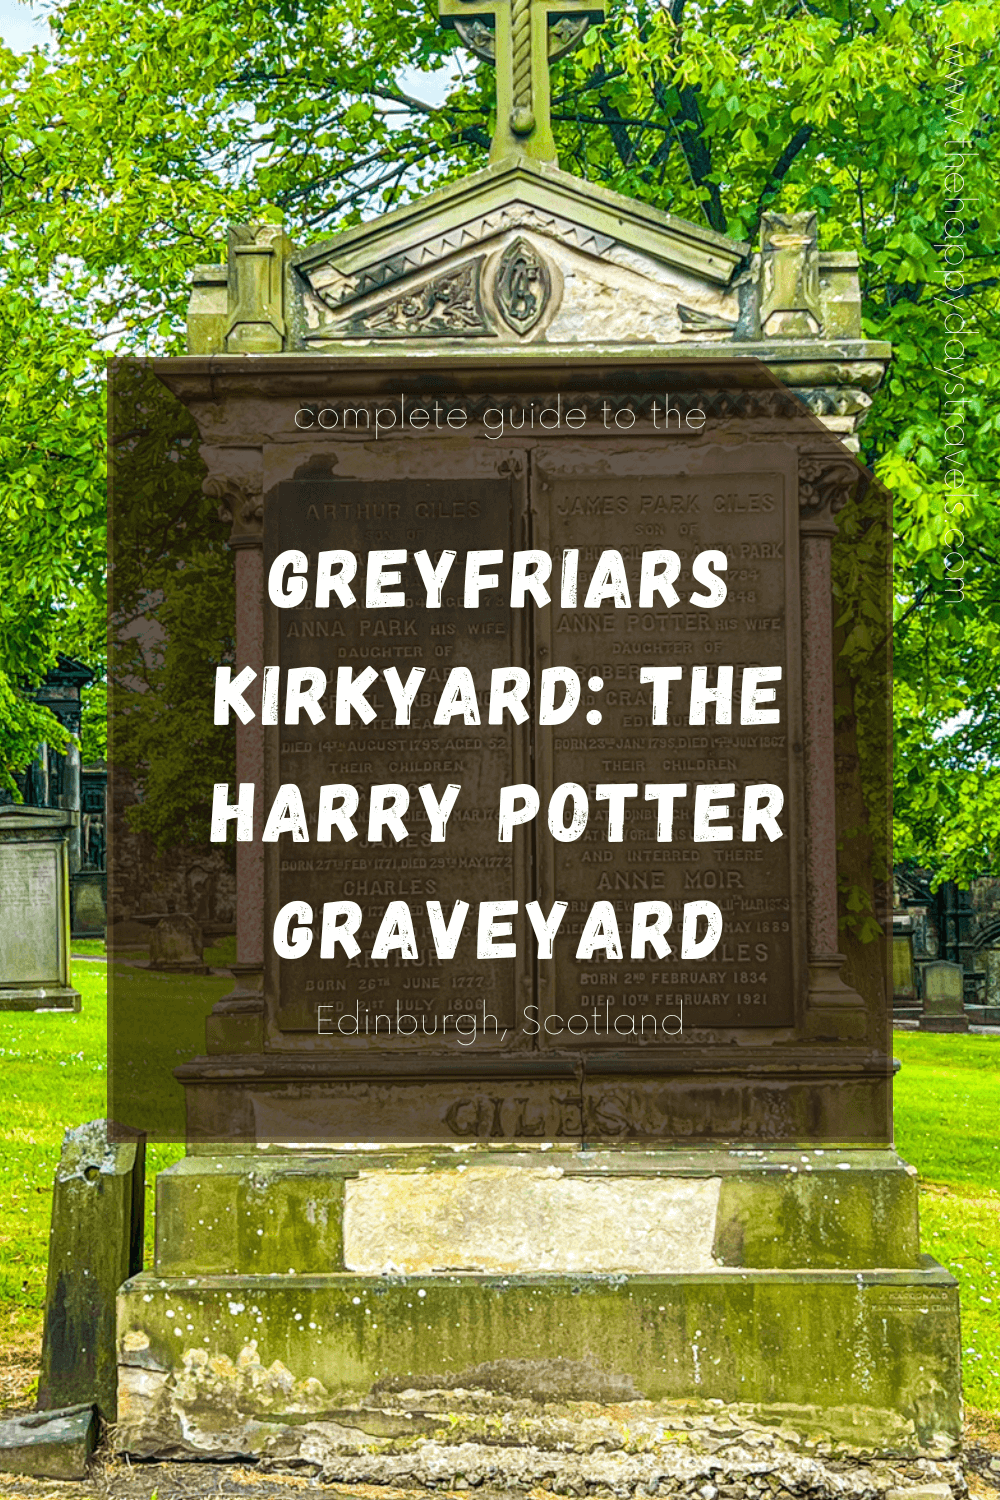 Pin image of Potter gravestone in Greyfriars Kirkyard. Text reads 'Complete guide to the Greyfriars Kirkyard: The Harry Potter Graveyard, Edinburgh Scotland'